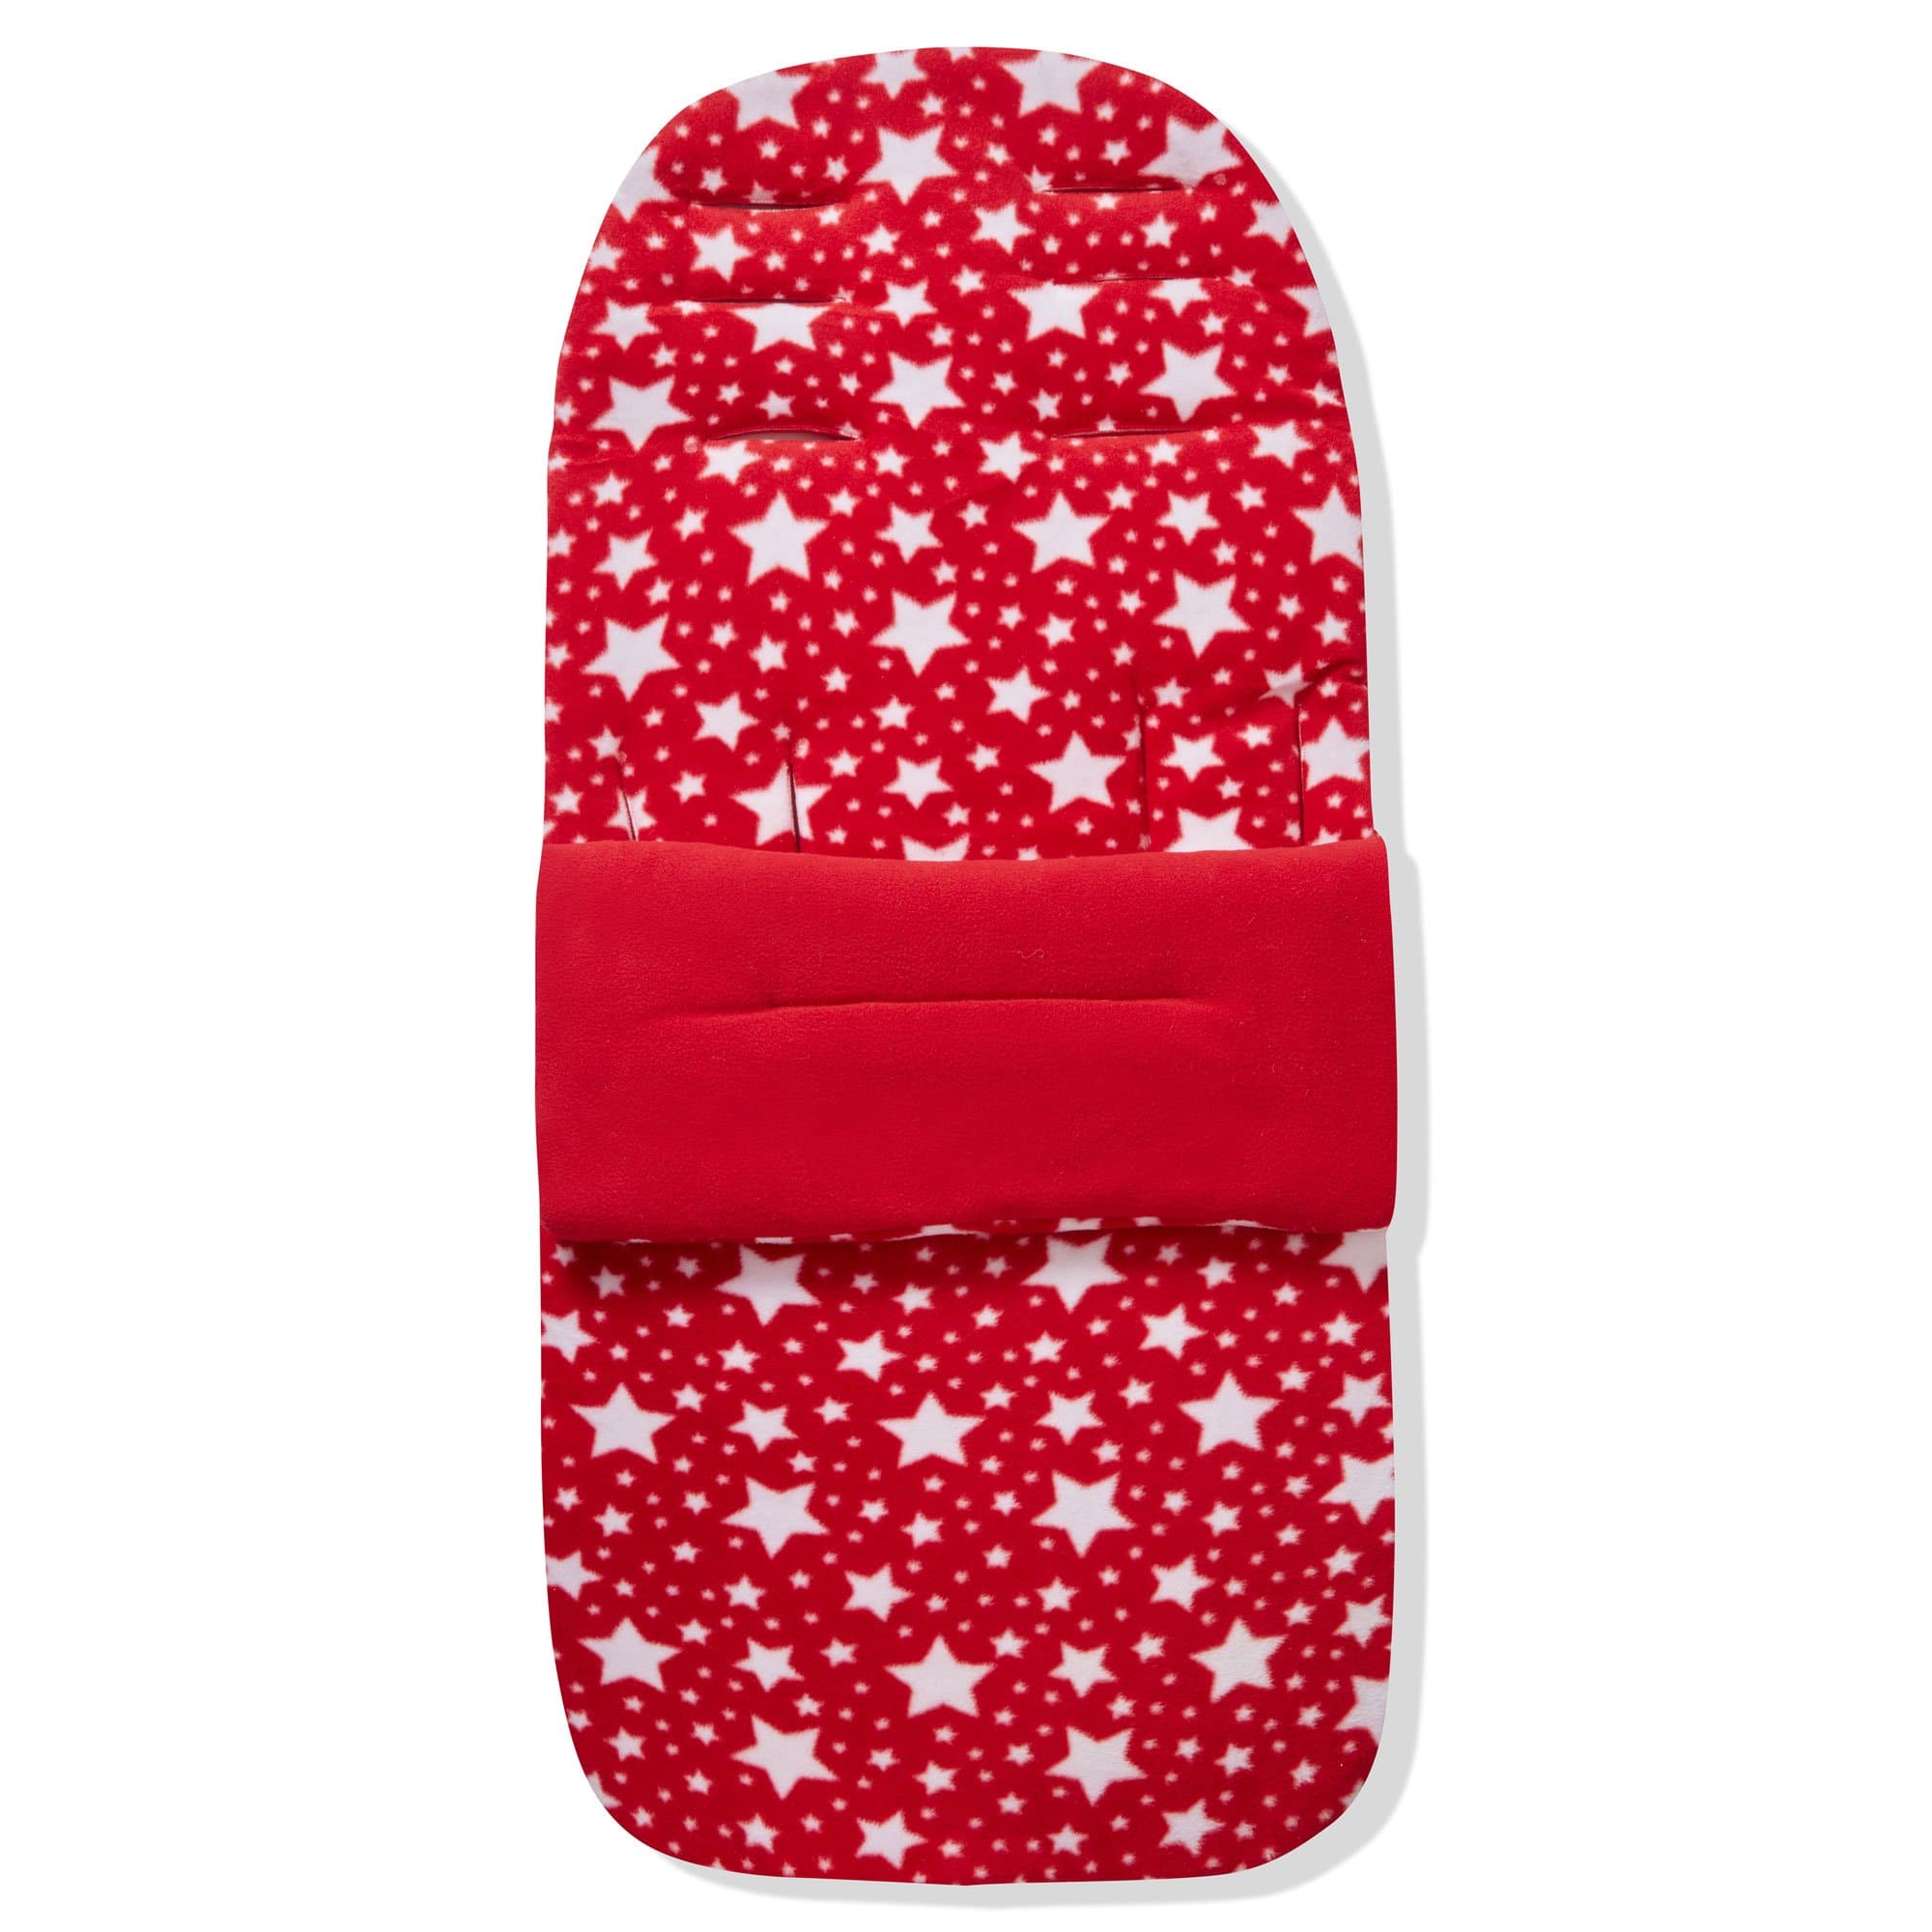 Fleece Footmuff / Cosy Toes Compatible with Maclaren - Red Star / Fits All Models | For Your Little One